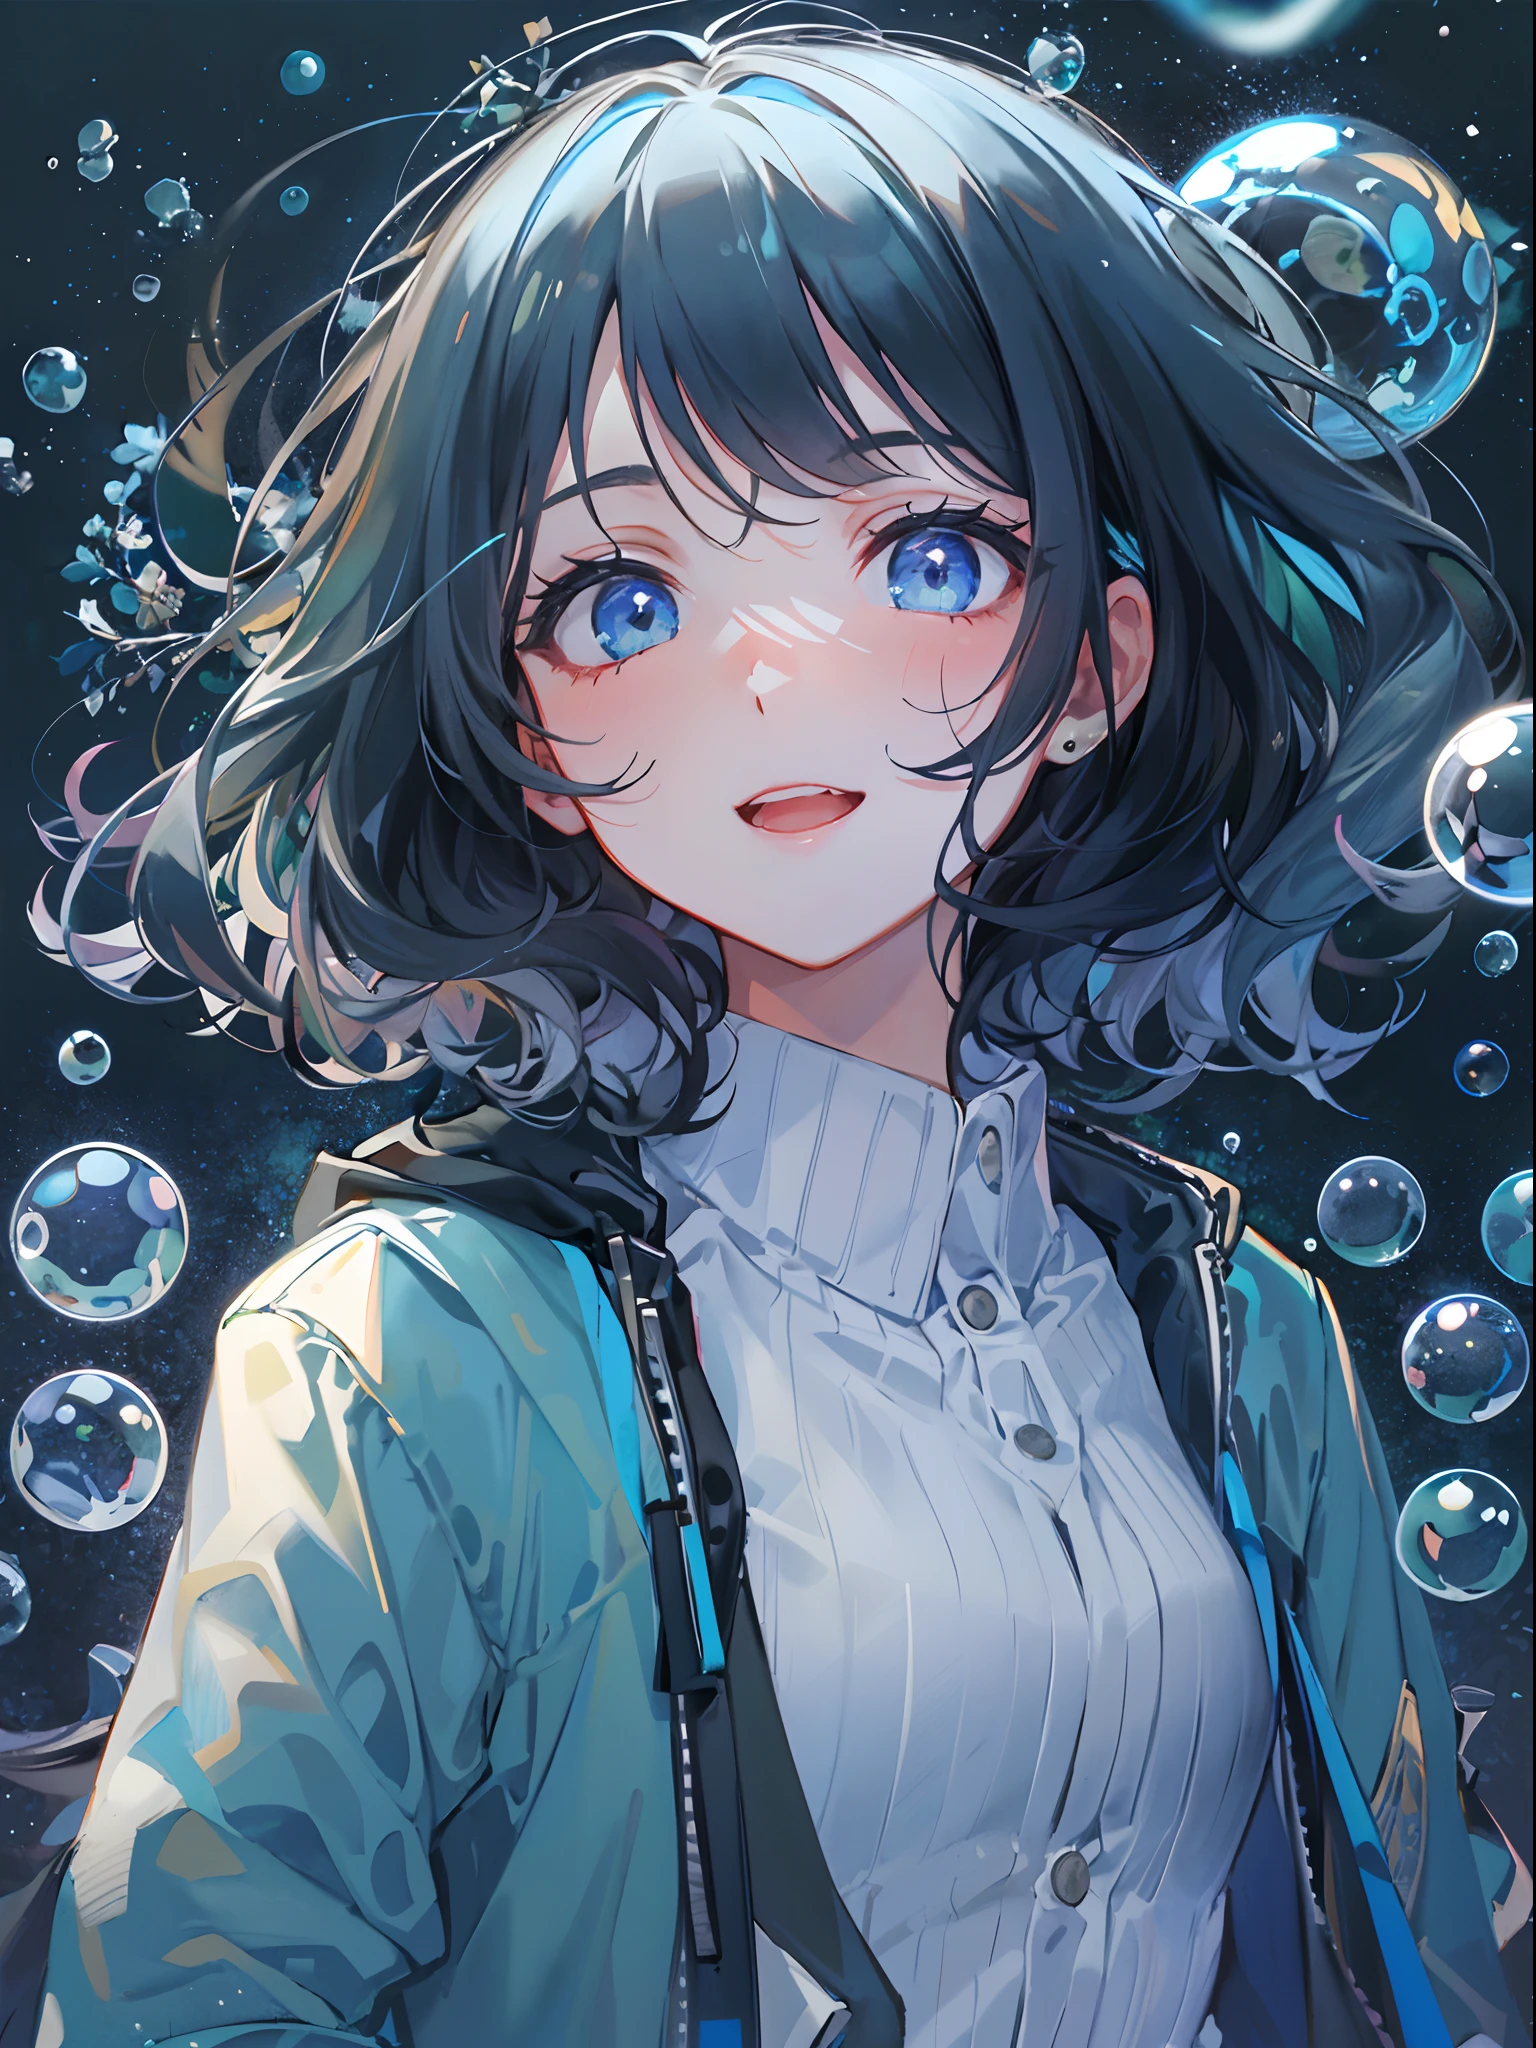 ((top-quality)), ((​masterpiece)), ((Ultra-detail)), (extremely delicate and beautiful), girl with, solo, cold attitude,((Black jacket)),She is very(relax)with  the(Settled down)Looks,A darK-haired, depth of fields,evil smile,Bubble, under the water, Air bubble,bright light blue eyes,Inner color with black hair and light blue tips,Cold background,Bob Hair - Linear Art, shortpants、knee high socks、White uniform like 、Light blue ribbon ties、Clothes are sheer、Hands in pockets